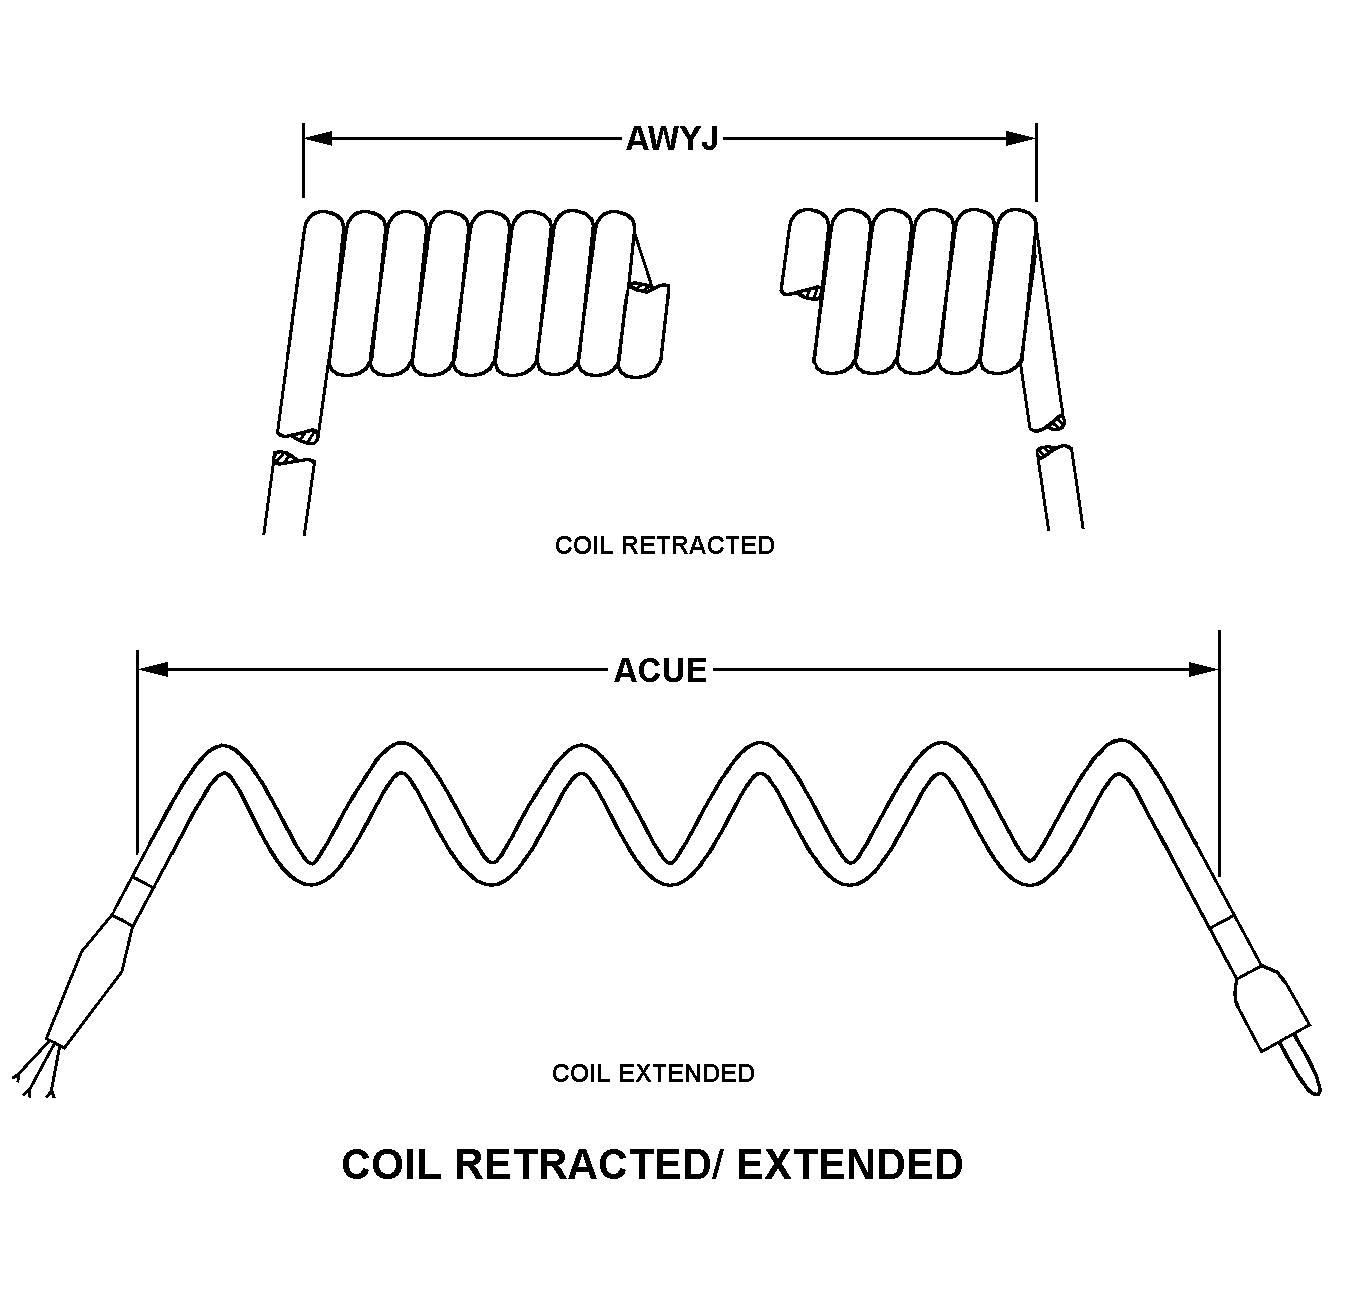 COIL RETRACTED/EXTENDED style nsn 6150-01-226-5012